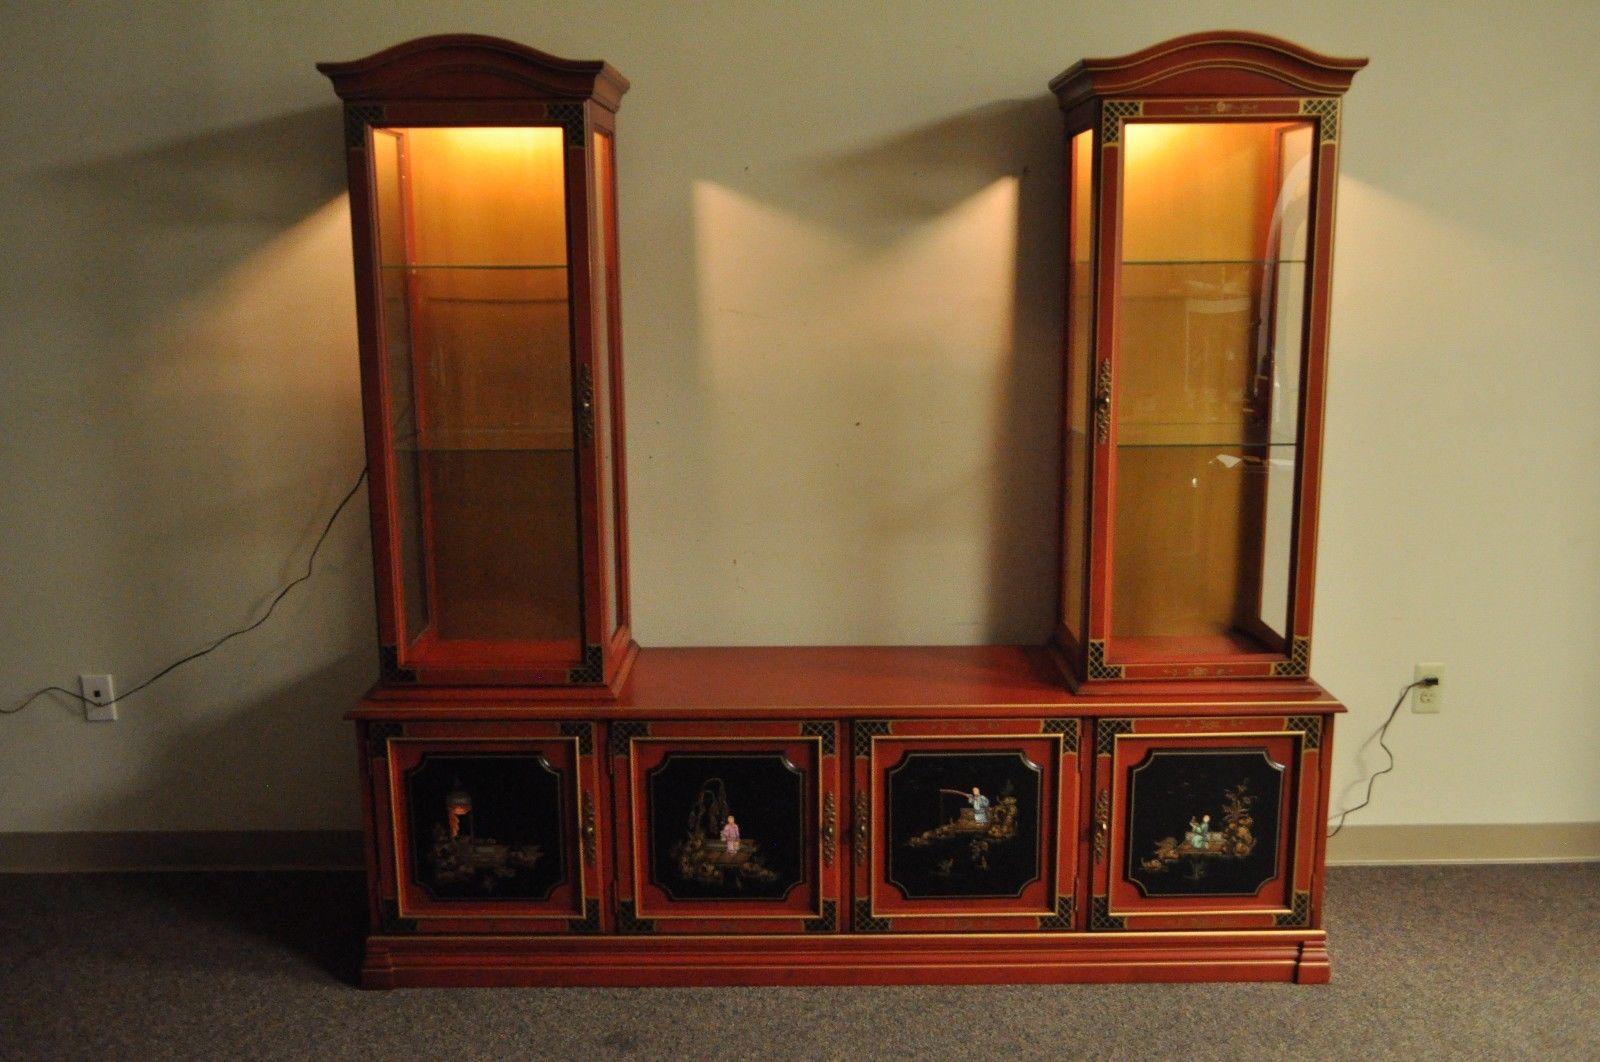 Vintage Chinoiserie / Oriental style three piece display cabinet by Jasper Cabinet Company. Item features high quality solid wood construction, red painted finish with gold trim, hand-painted scenic front and side panels, curved glass upper doors,